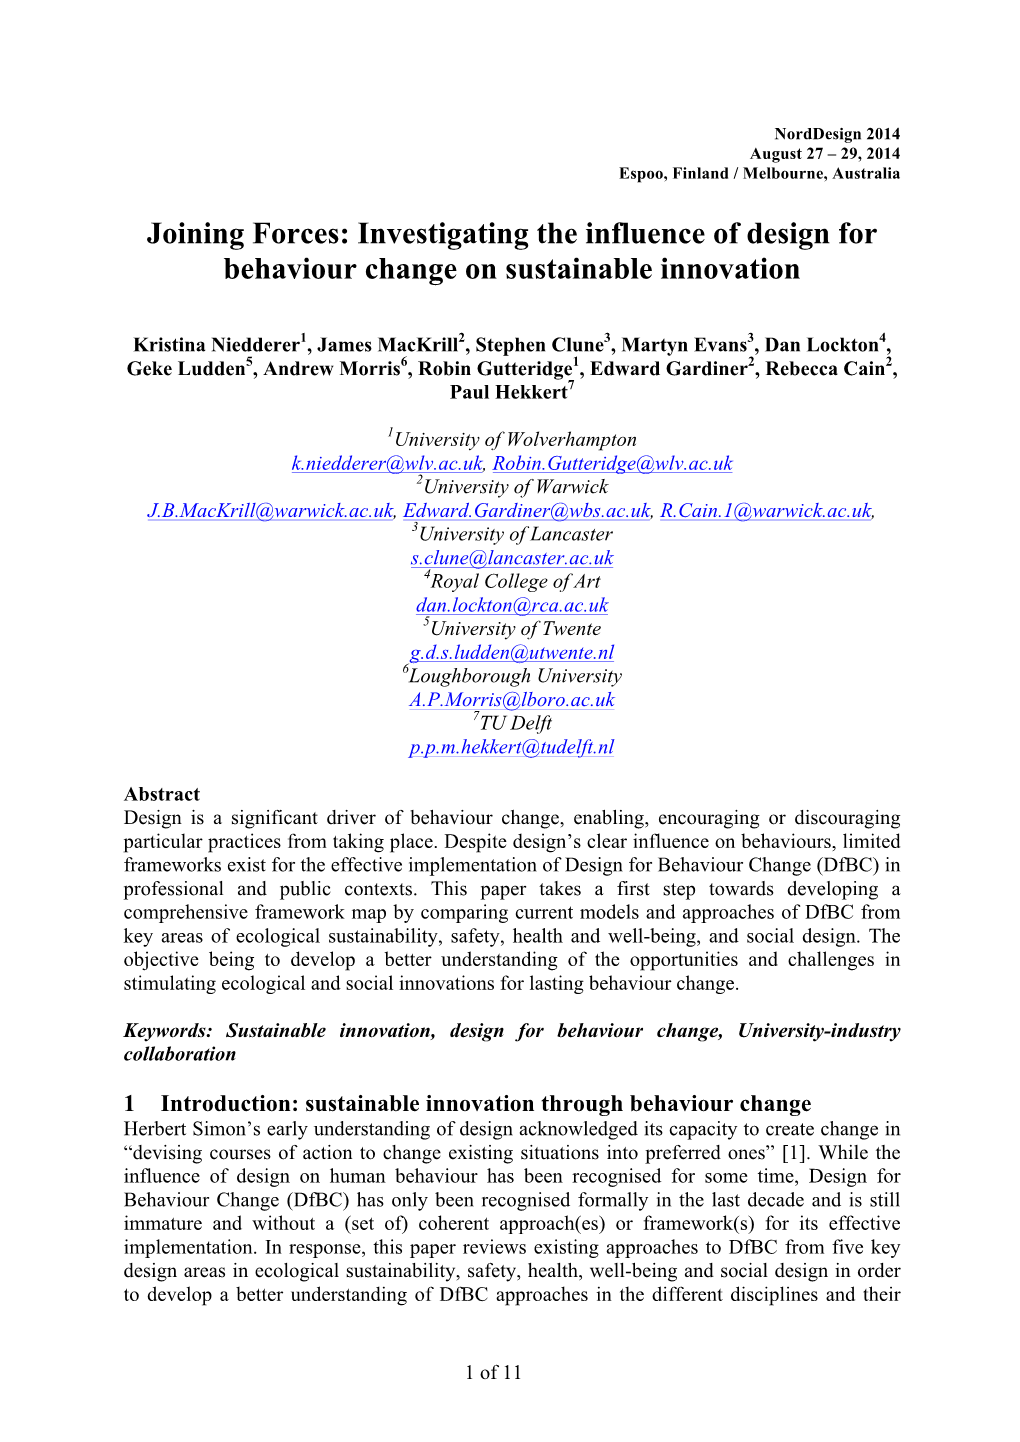 Investigating the Influence of Design for Behaviour Change on Sustainable Innovation